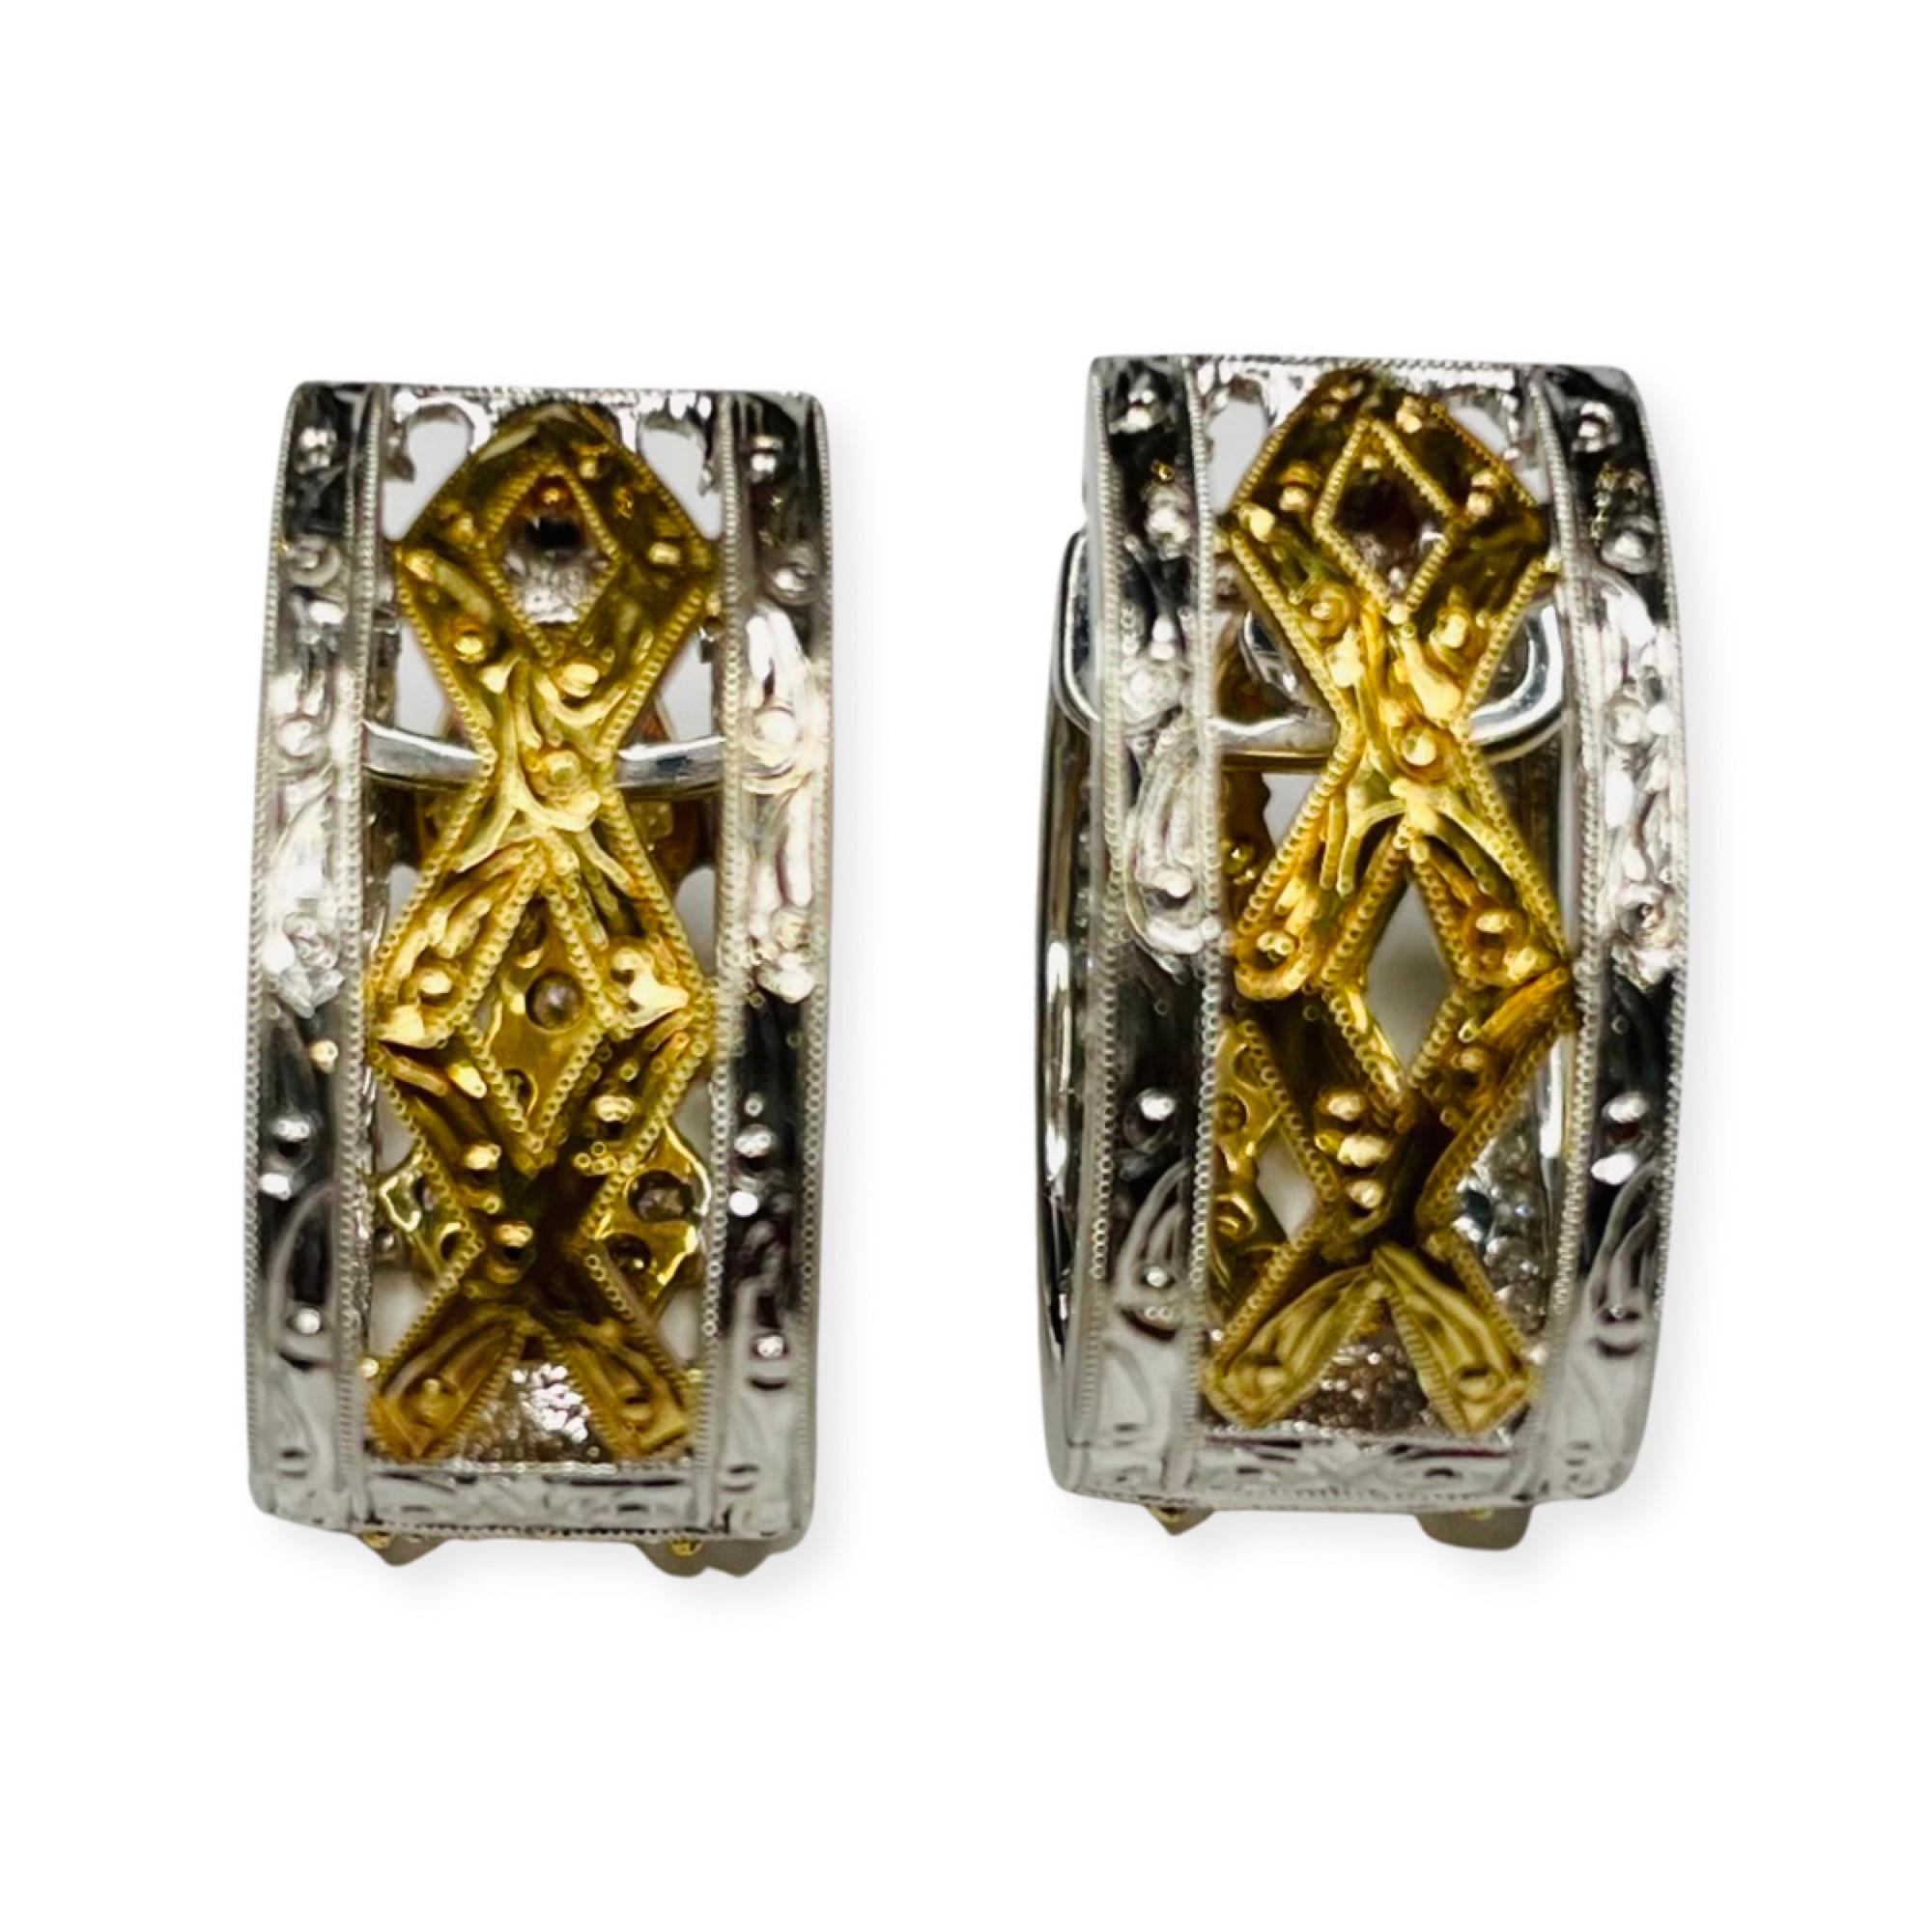 18K White & Yellow Gold Reversible Huggies Diamond Earrings by Simon G. The earrings are 18.5mm long. They are 11mm wide. There are 90 full cut round brilliant diamonds of VS clarity and G color for a total diamond weight of 0.72 carats.  There are